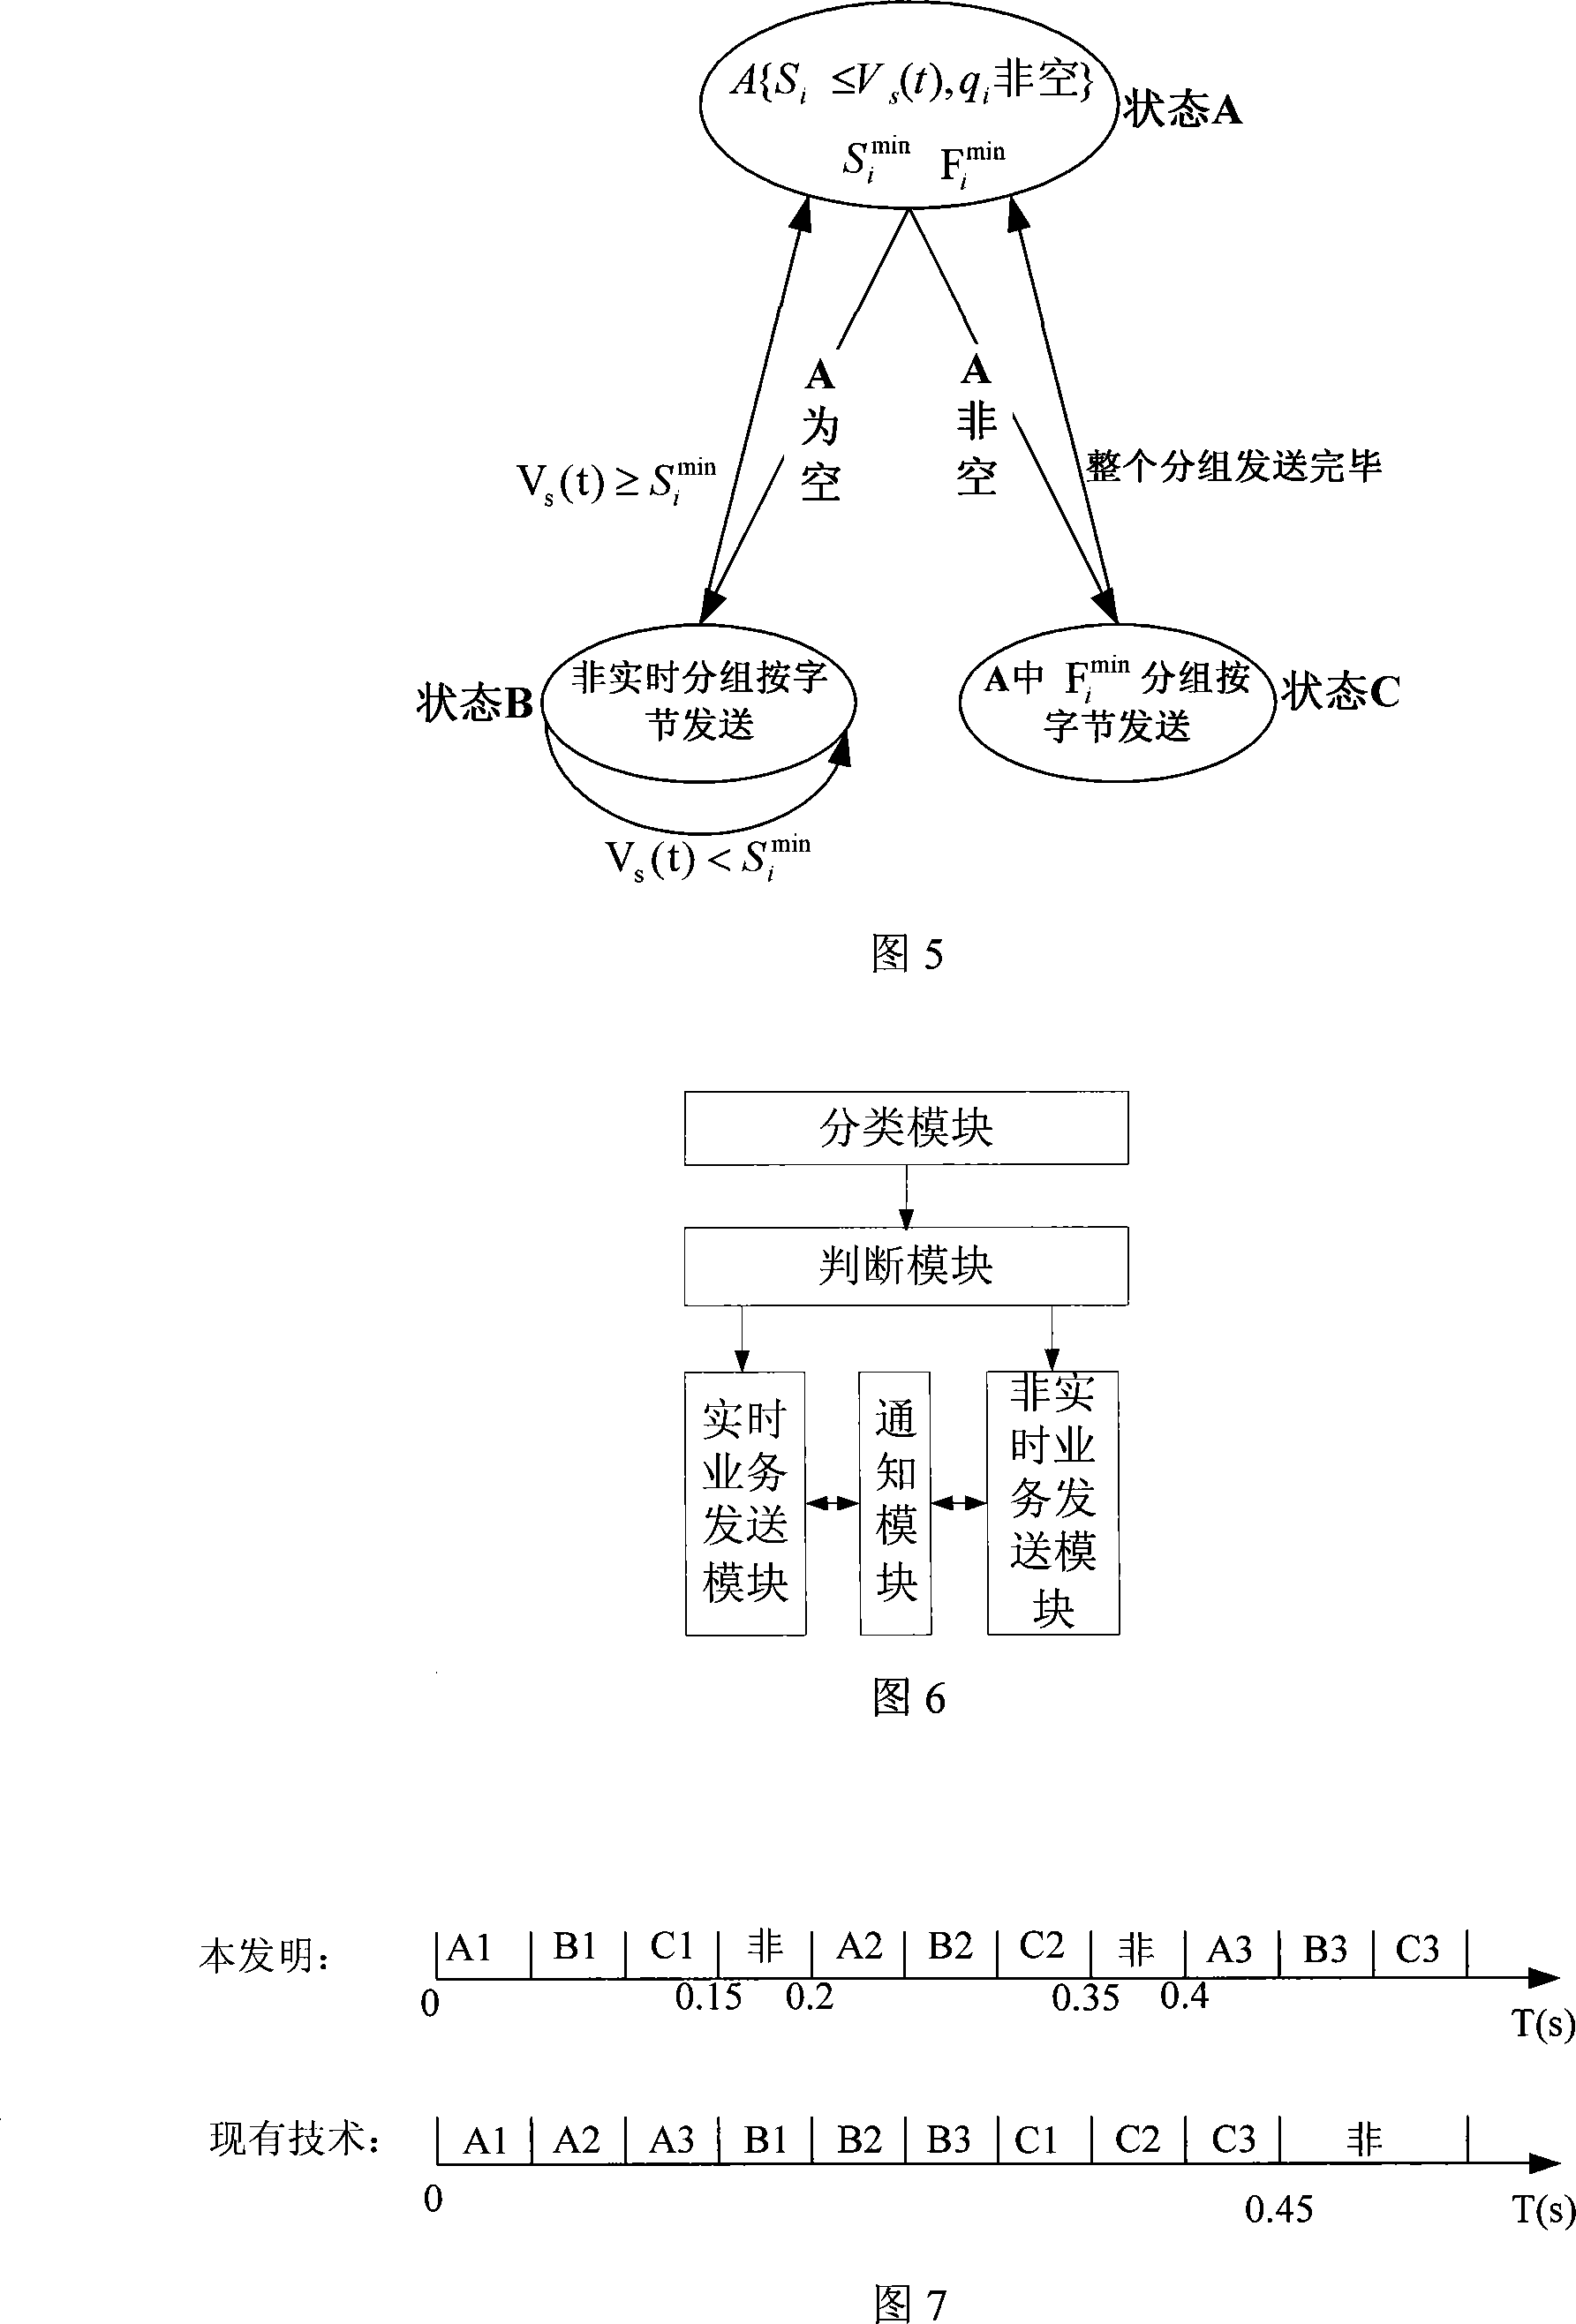 Method and apparatus for scheduling packet